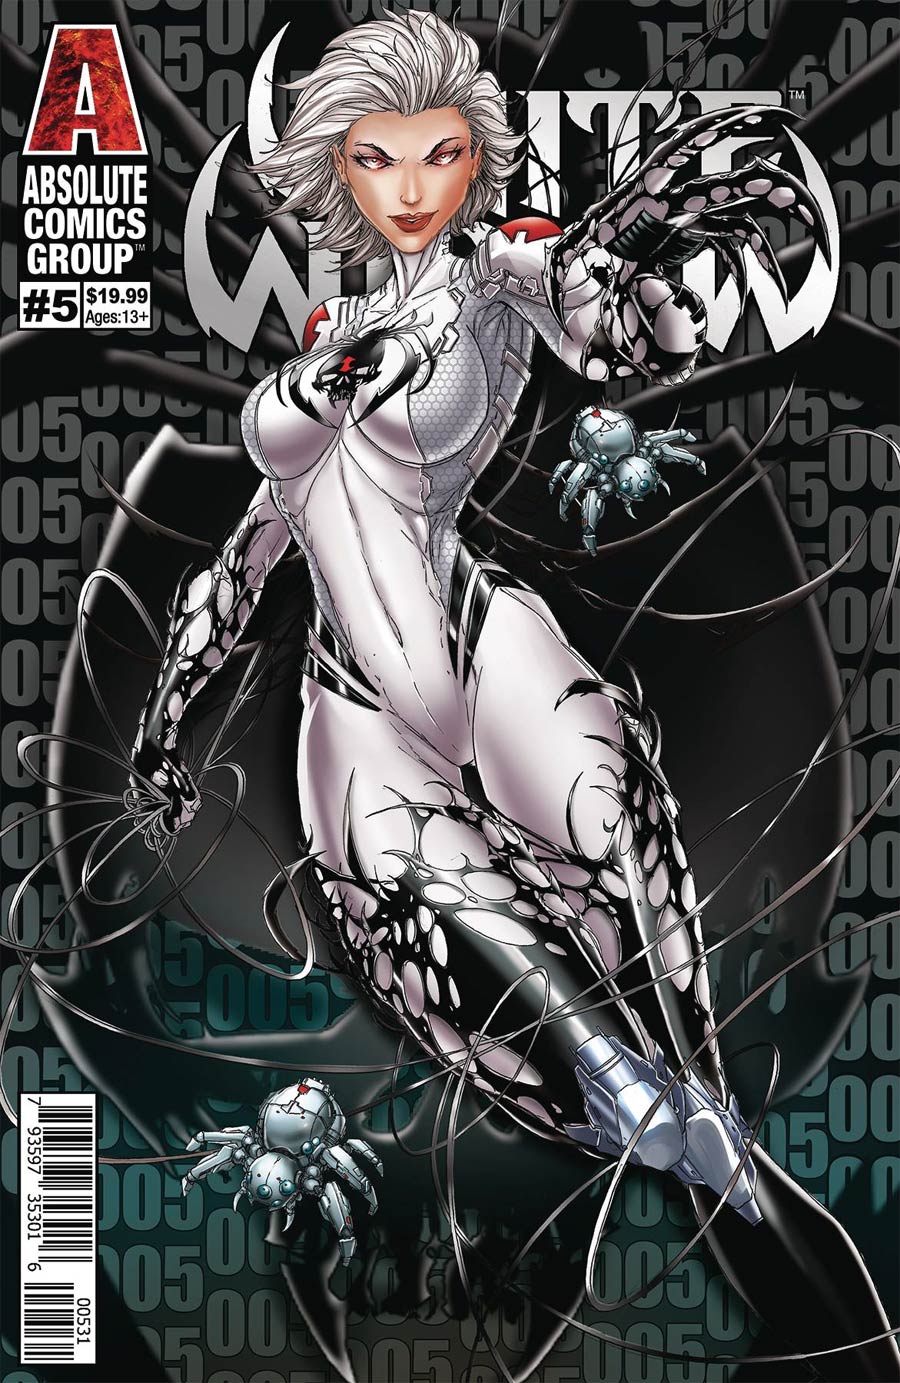 White Widow (Absolute Comics Group) #5 Cover C Variant Jamie Tyndall Wraparound Lenticular Cover